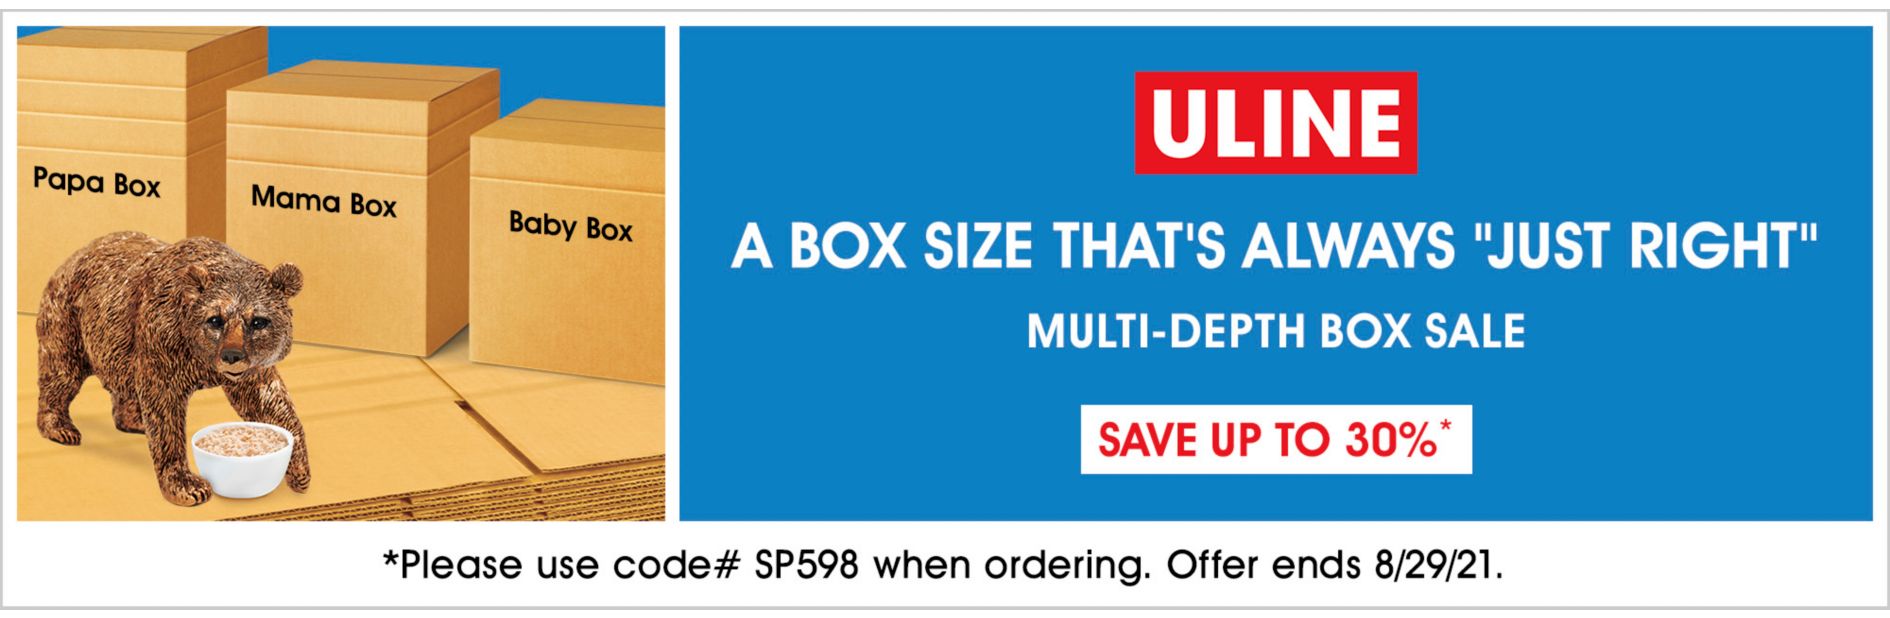 SP598 Multi-Depth Box Sale, Save up to 30%, Use code SP598, Offer ends 8/29/21